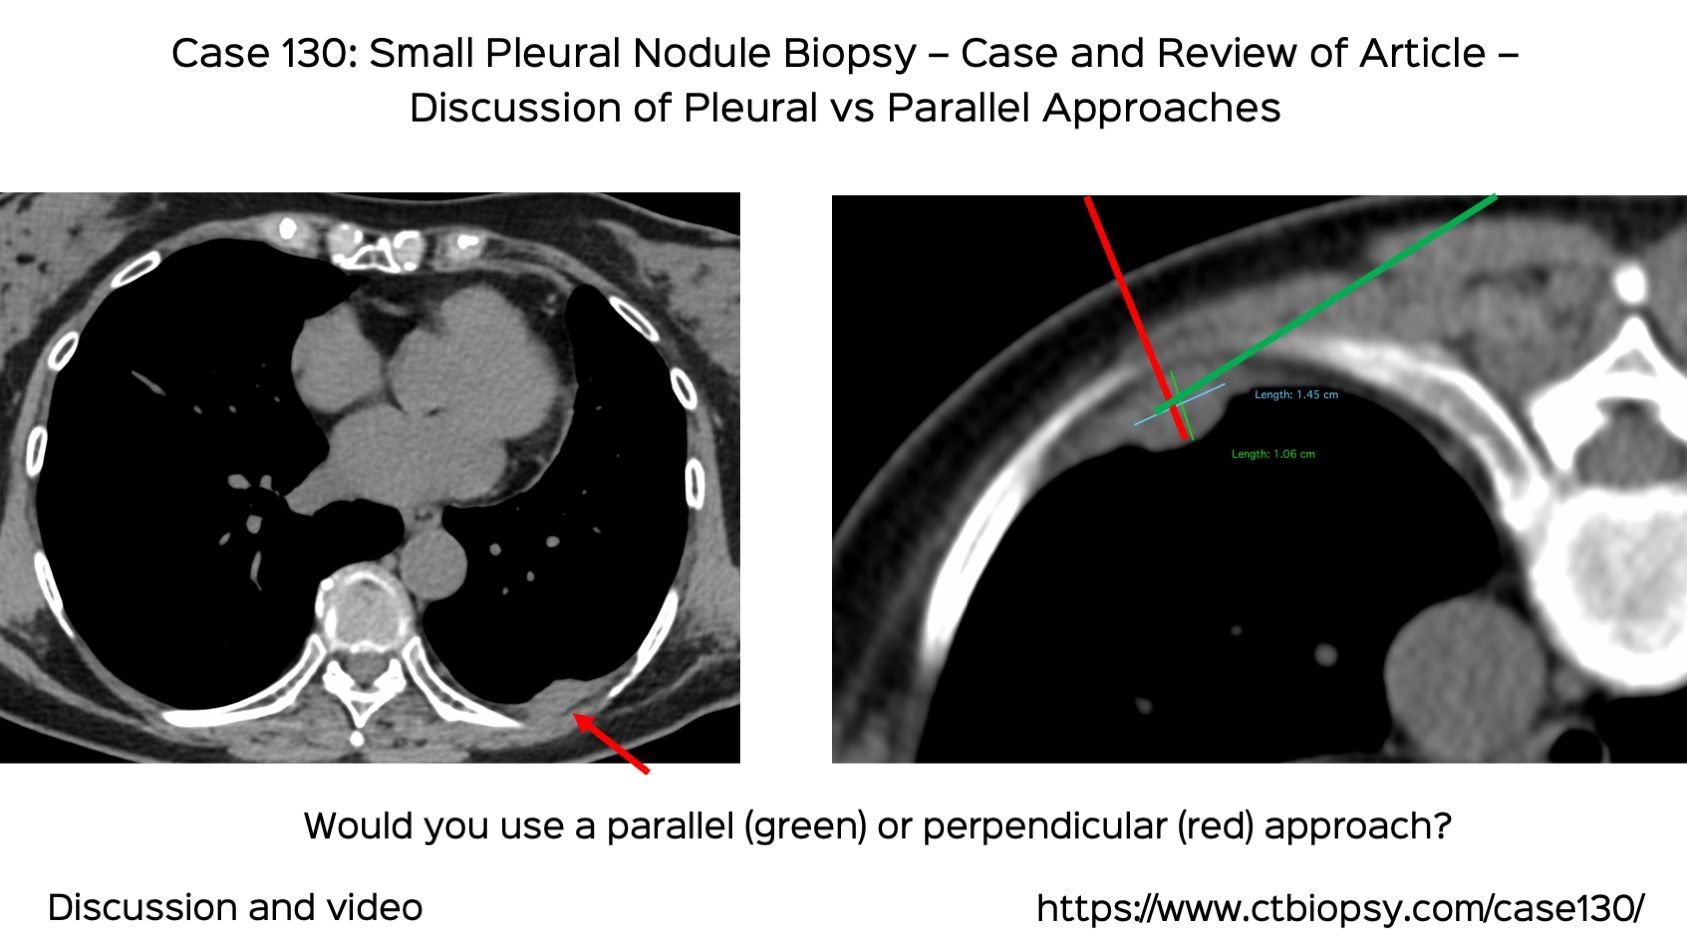 Case 130: Small Pleural Nodule Biopsy - Case and Article Review - Perpendicular vs Parallel Approaches